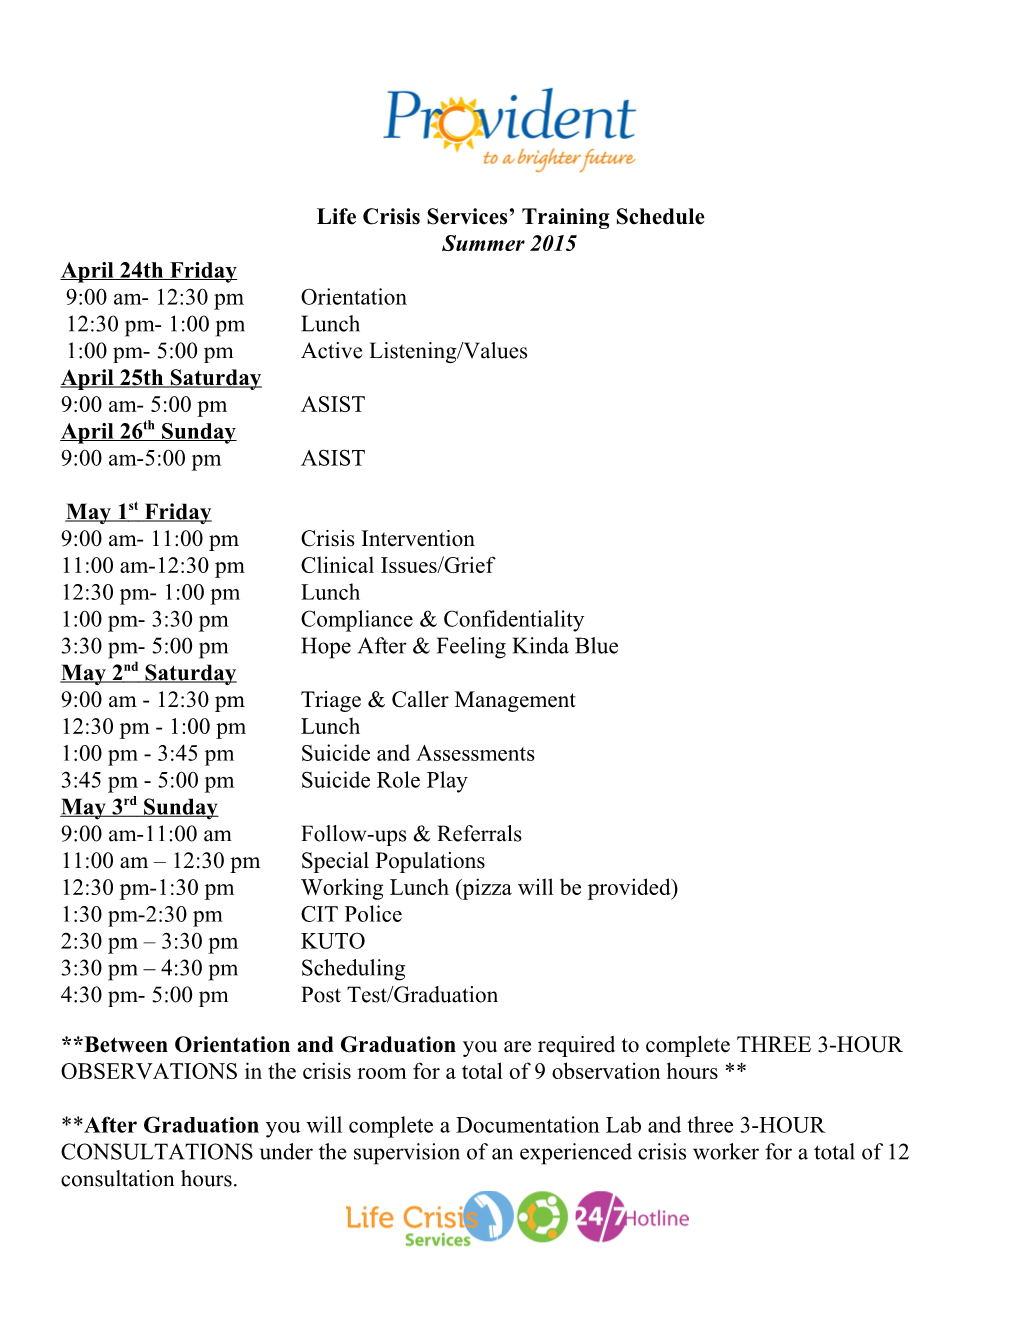 Life Crisis Services Training Schedule